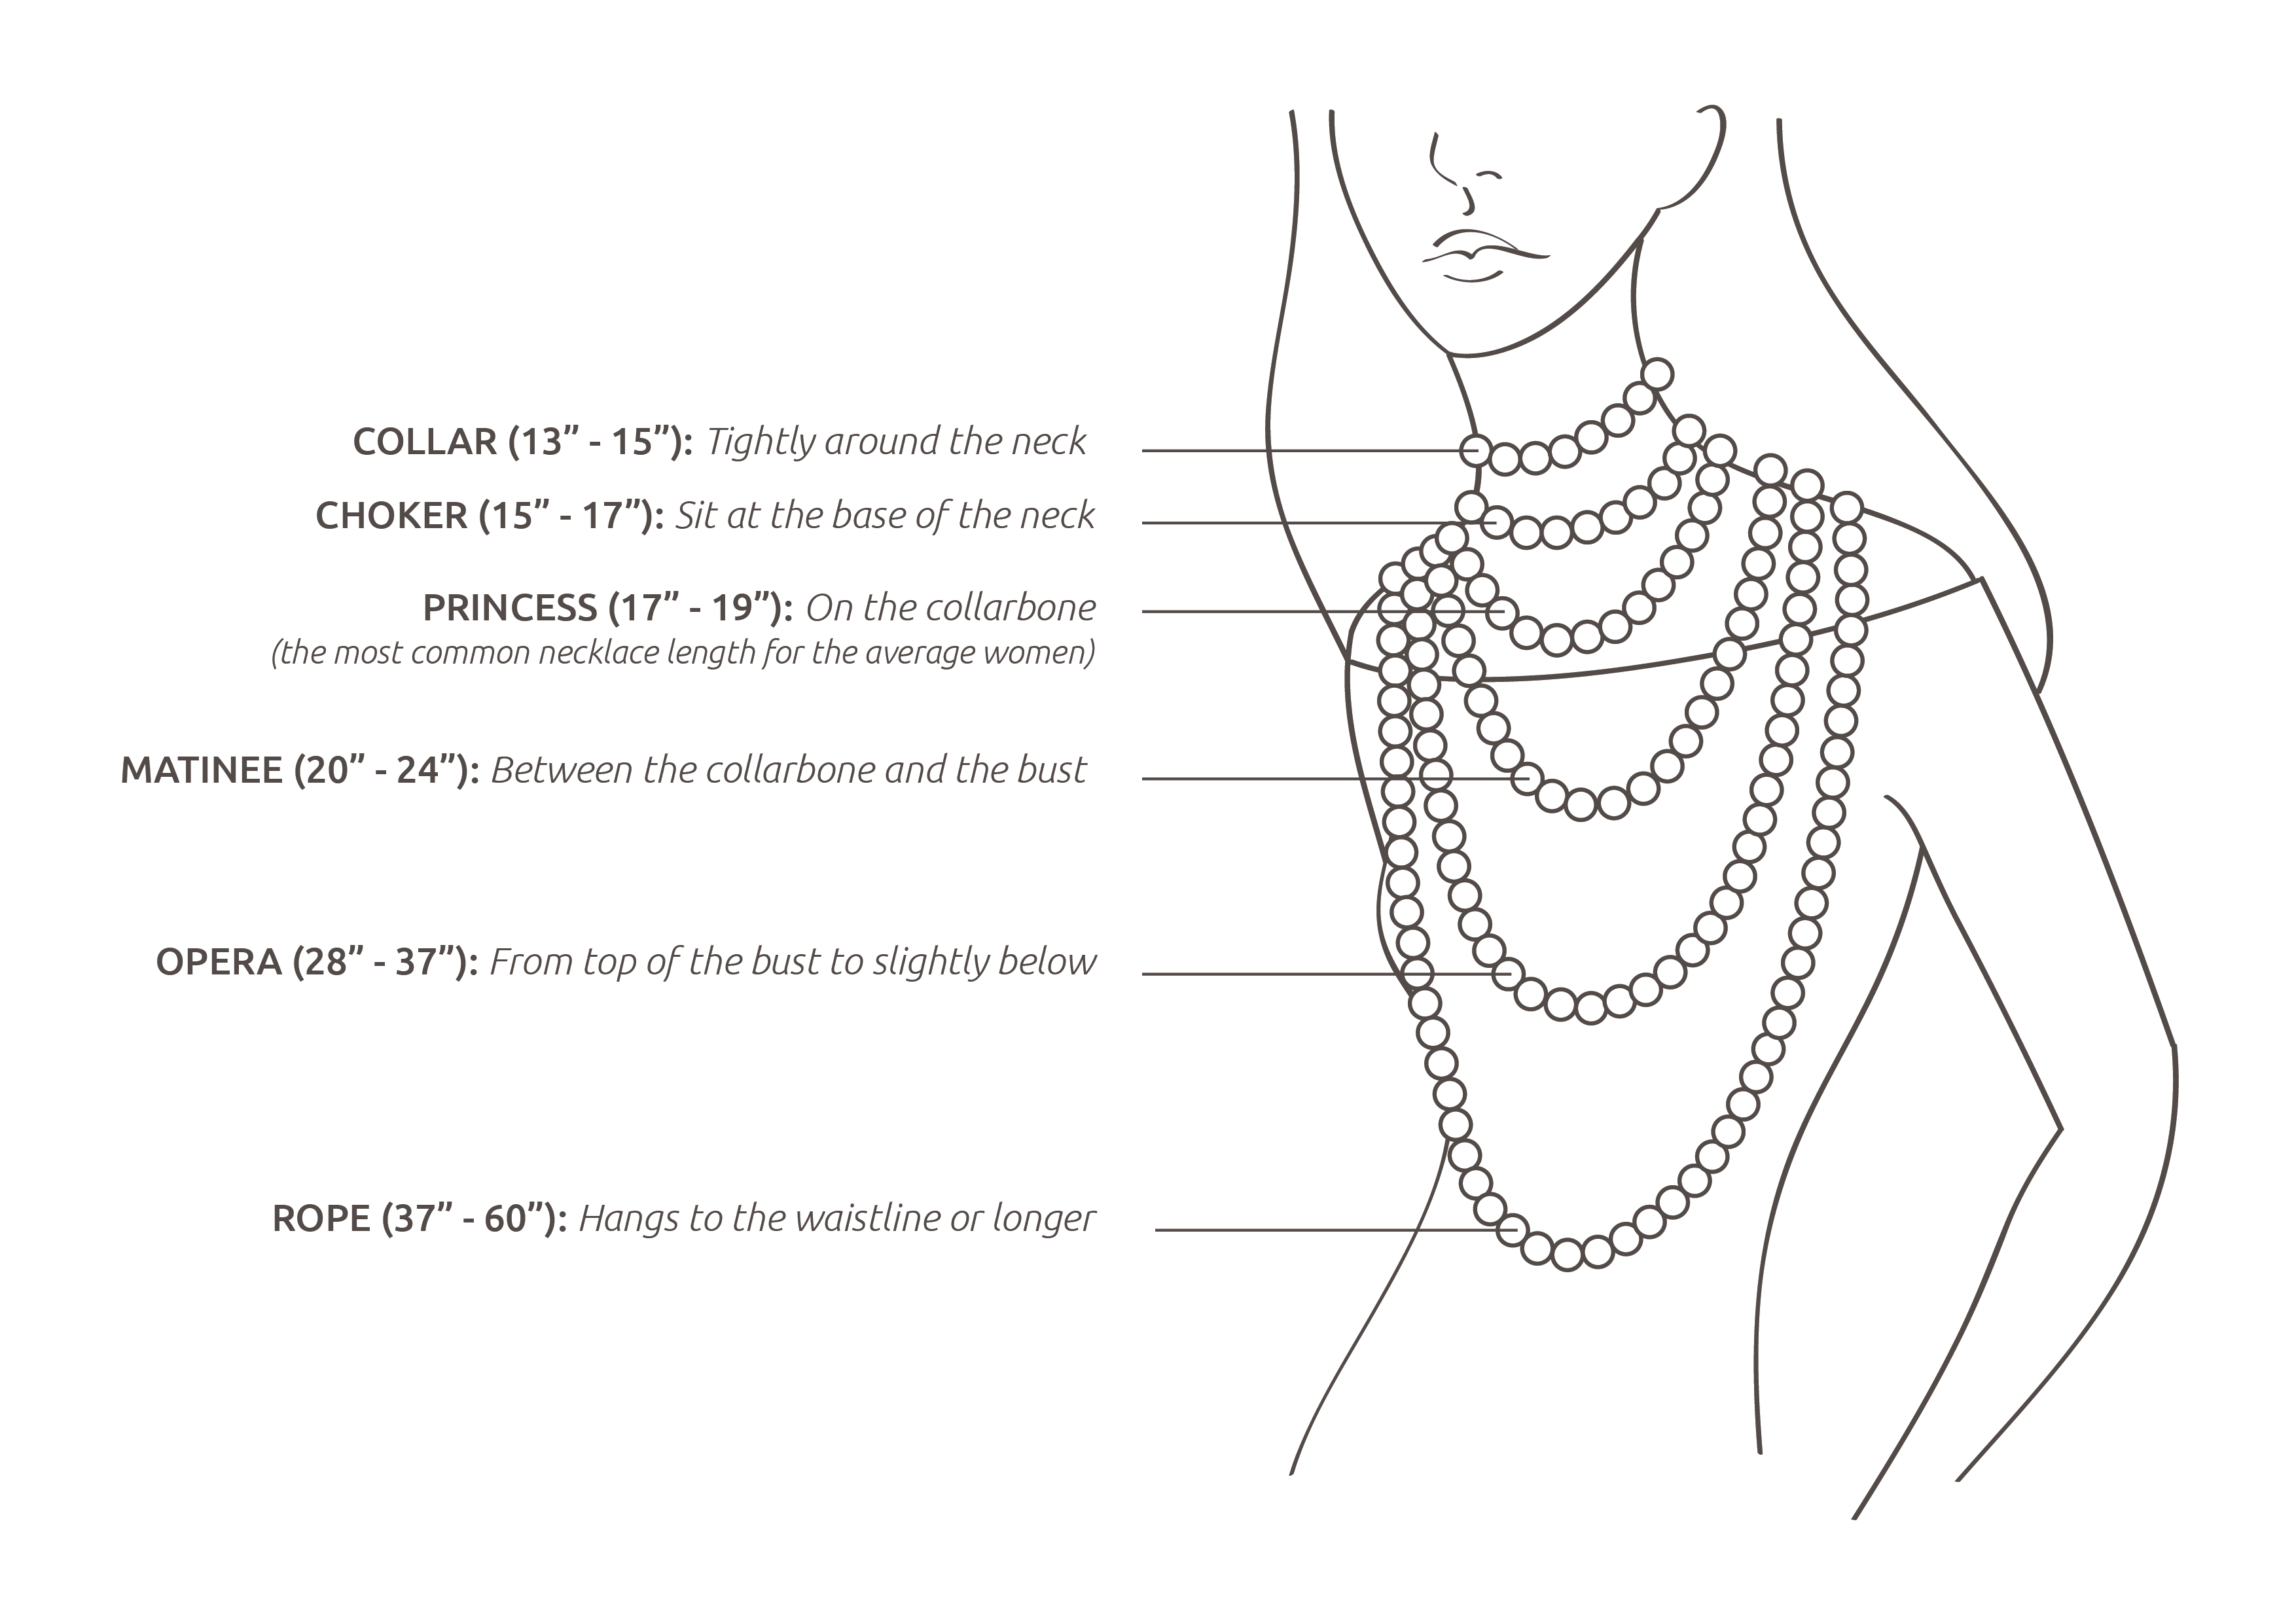 Necklace Length Guide: How To Measure & Choose The Right Necklace Length